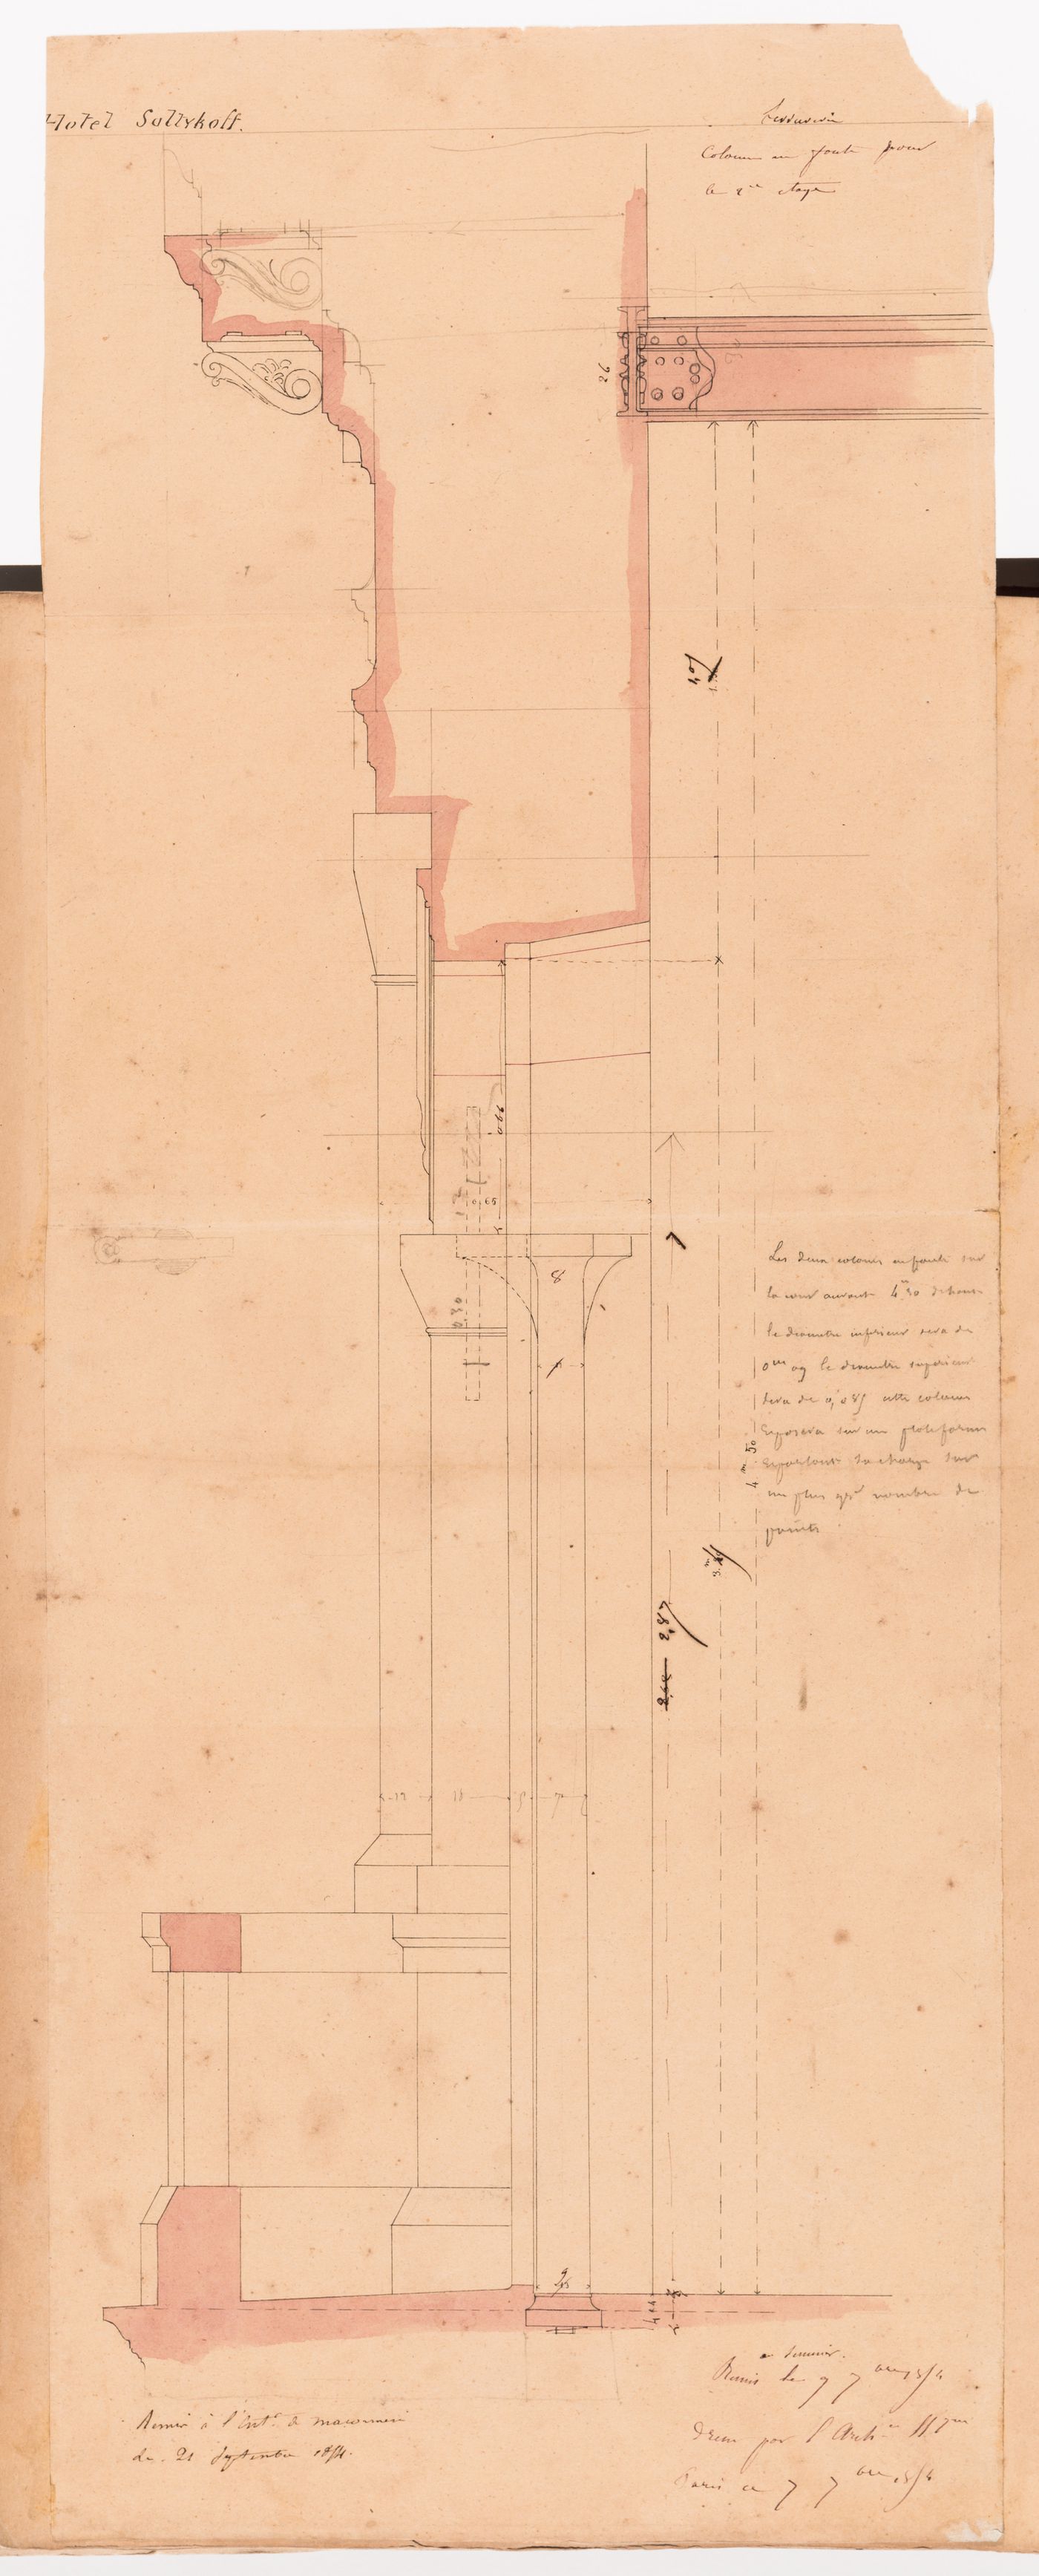 Details for the base and capital for a cast iron column, Hôtel Soltykoff; verso: Wall section indicating the location of the cast iron columns on the second floor, Hôtel Soltykoff